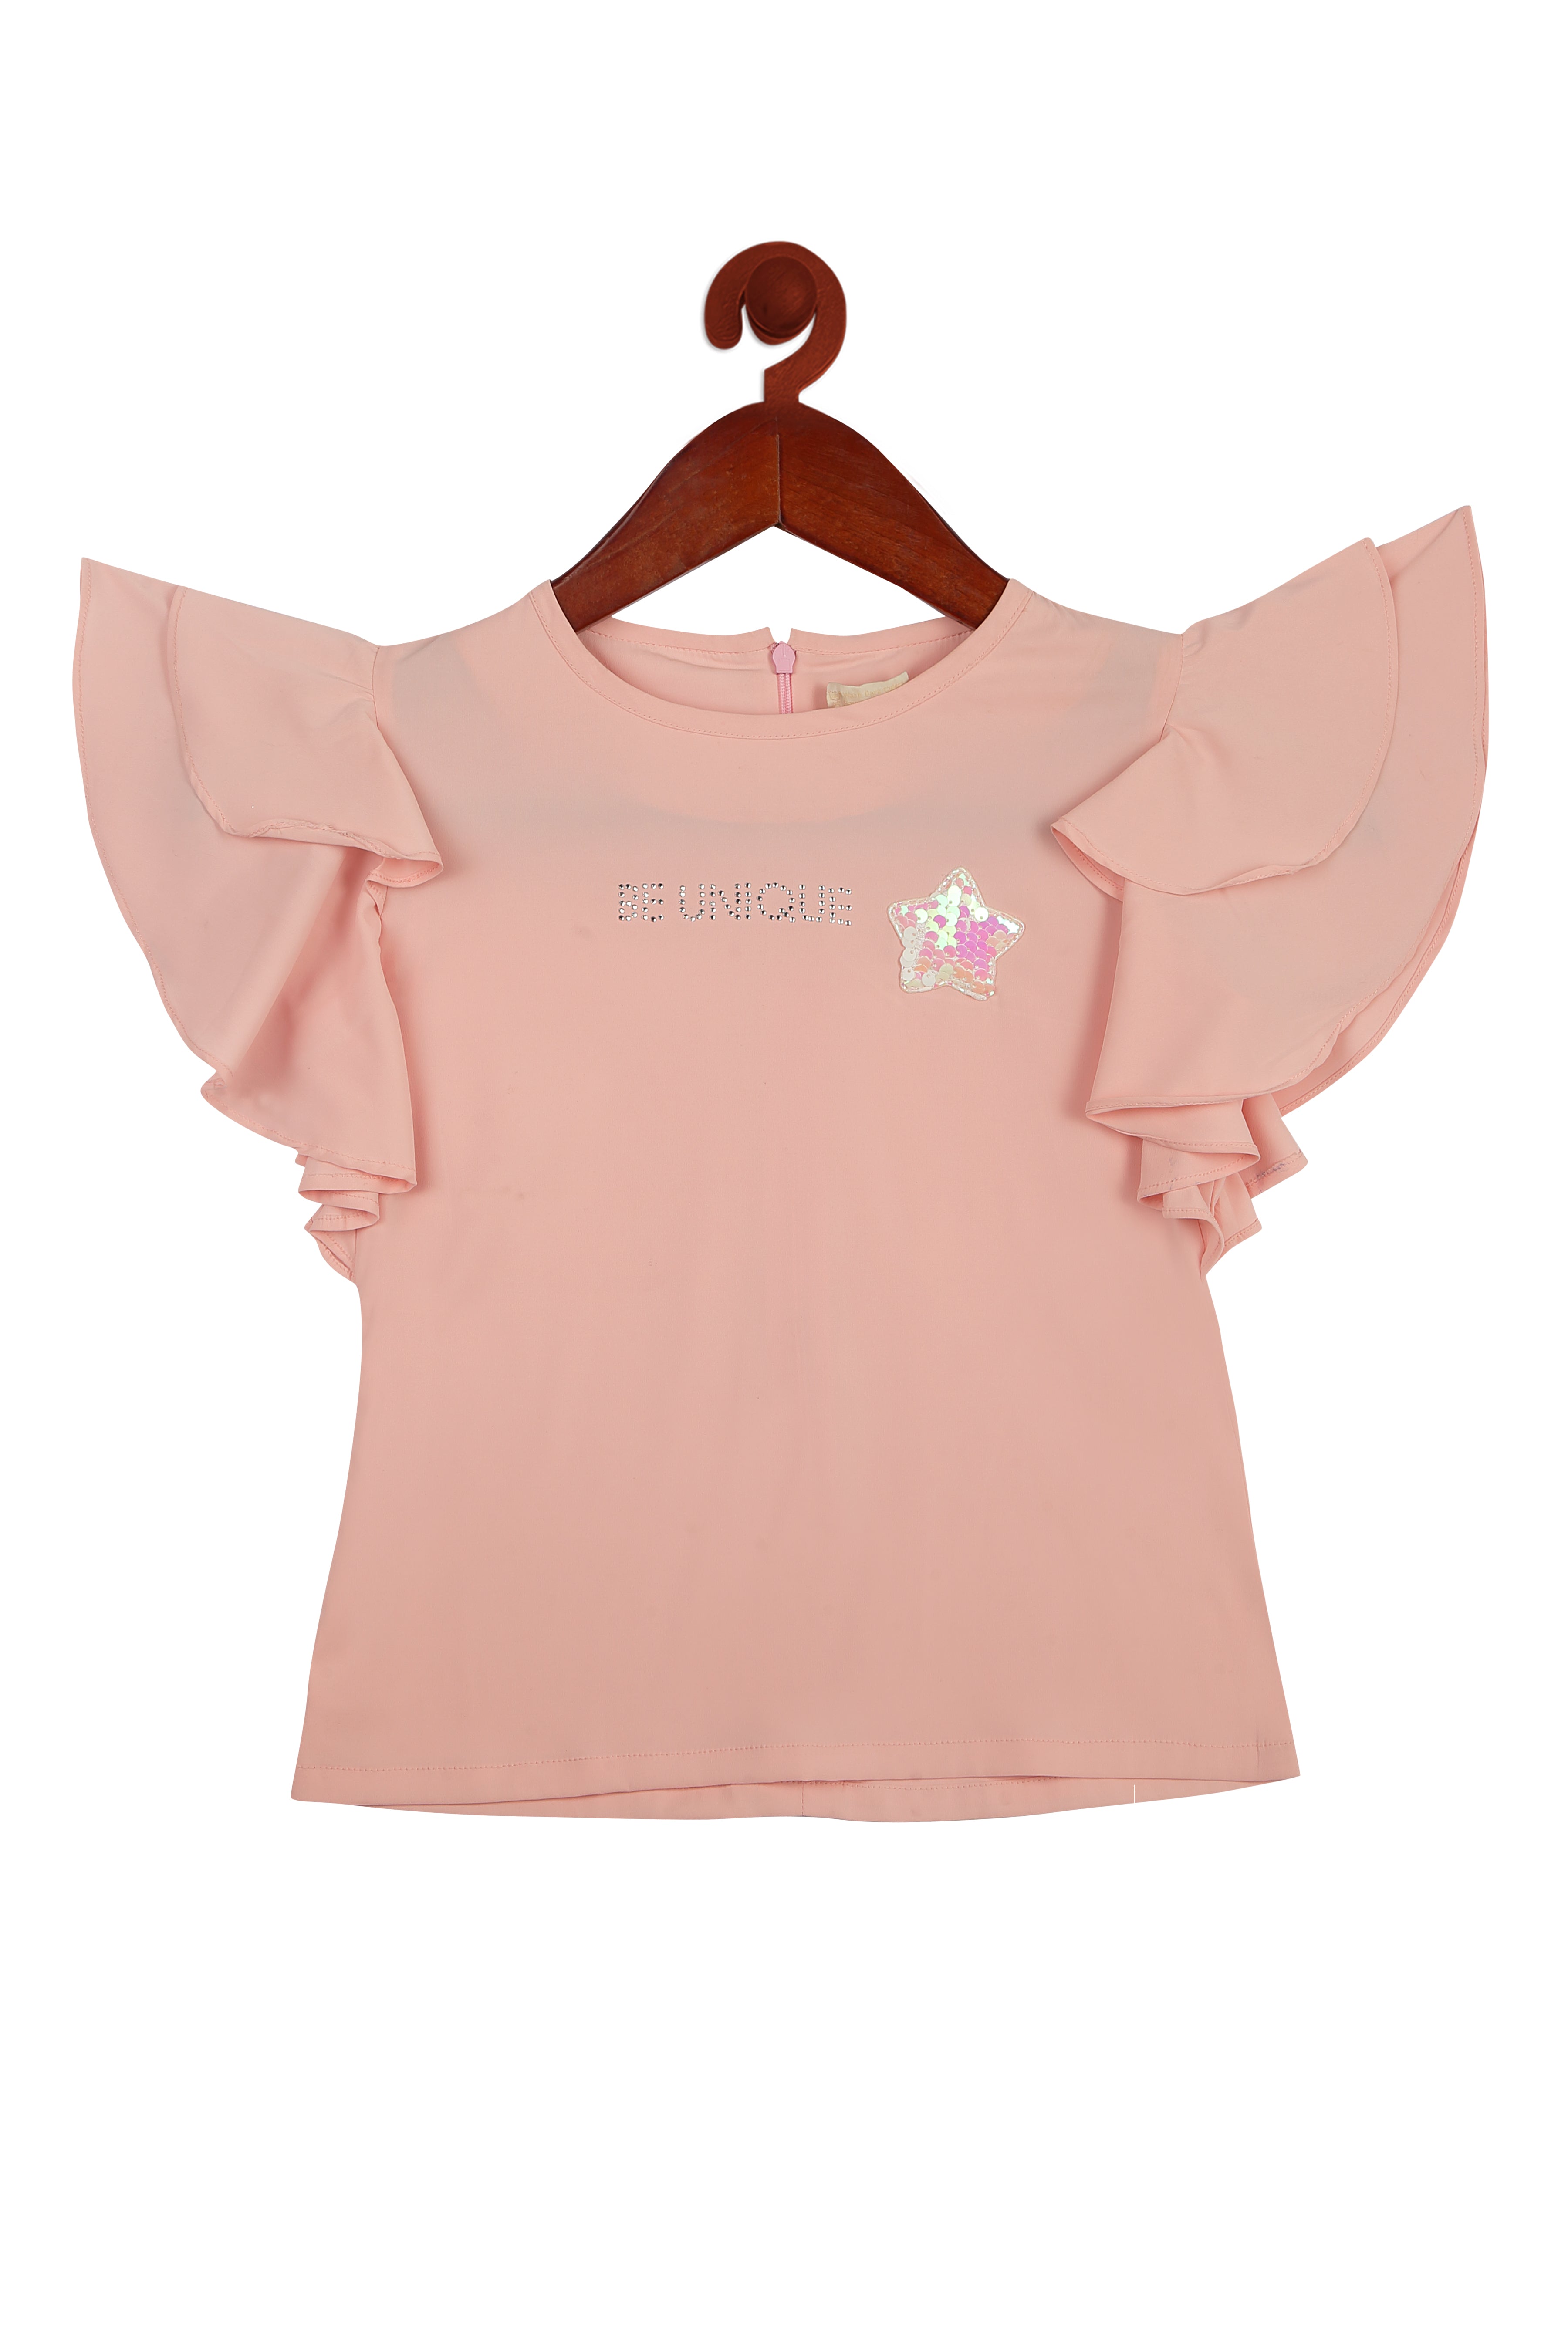 Be Unique Ruffle Sleeve Top